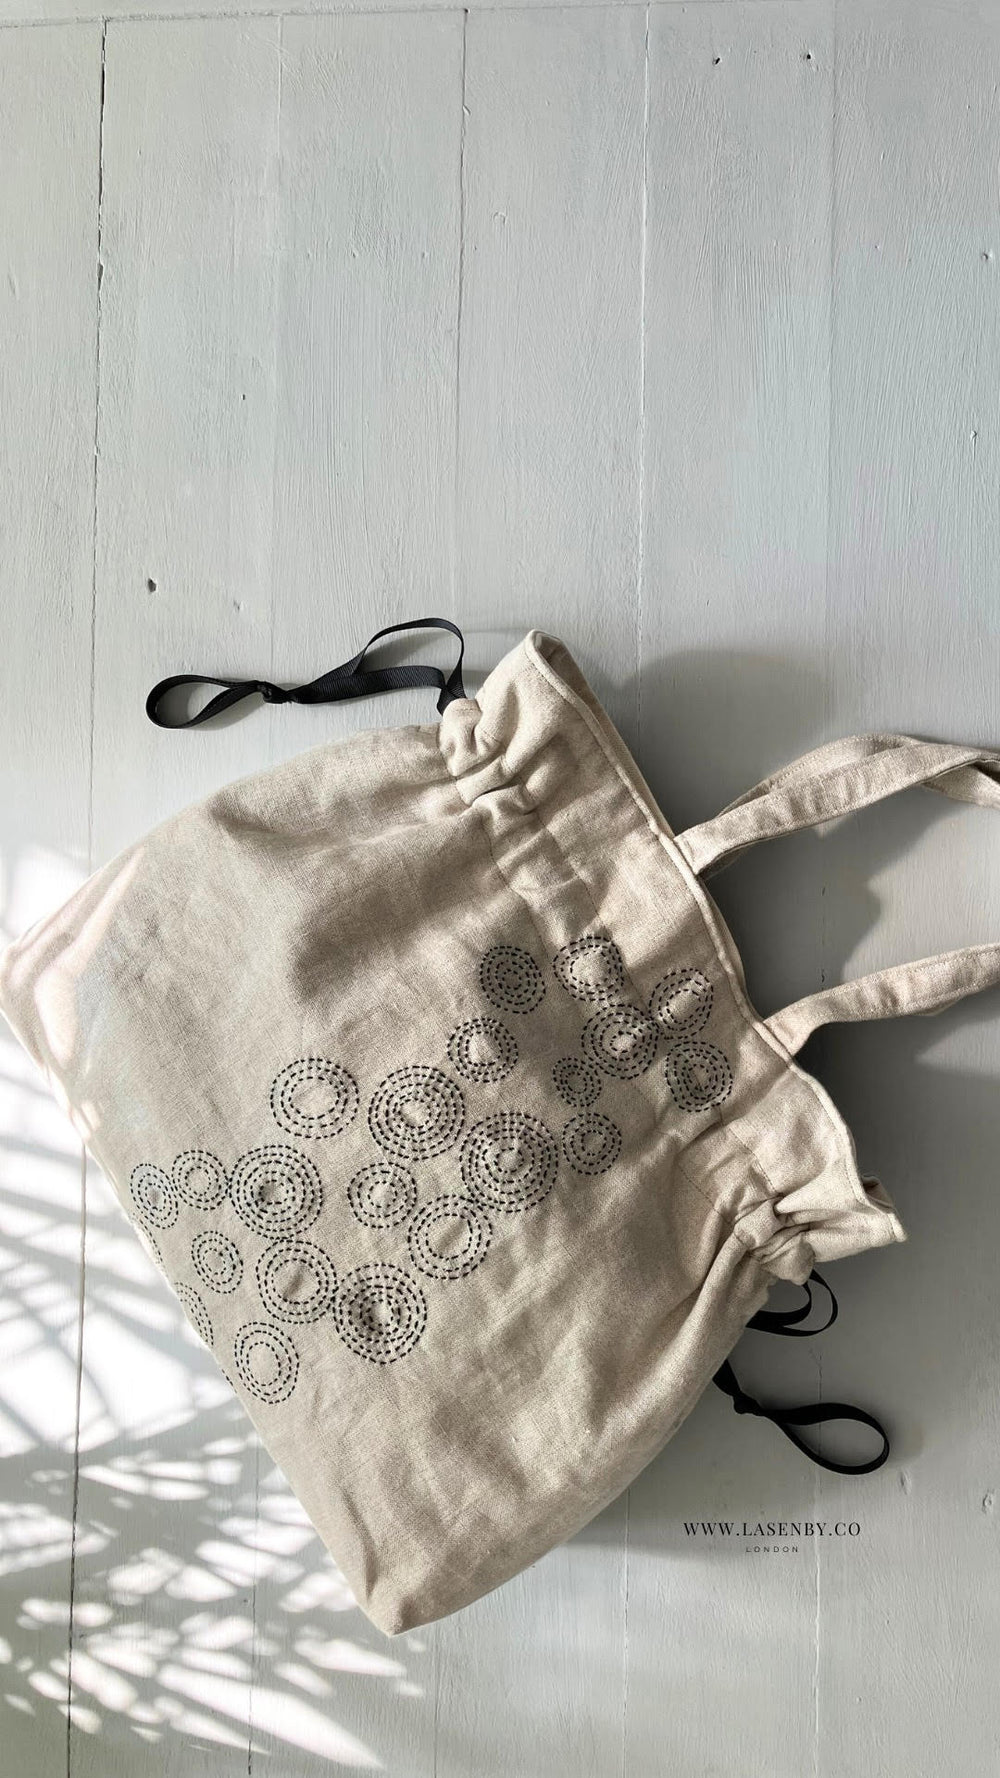 Photo showing the Hebe Maru Bag sewing pattern from Lasenby on The Fold Line. A drawstring tote pattern made in linen, lightweight canvas, quilting cotton, twill, duck, lightweight denim, or fine tweed fabrics, featuring a sashiko embroidery design, two s